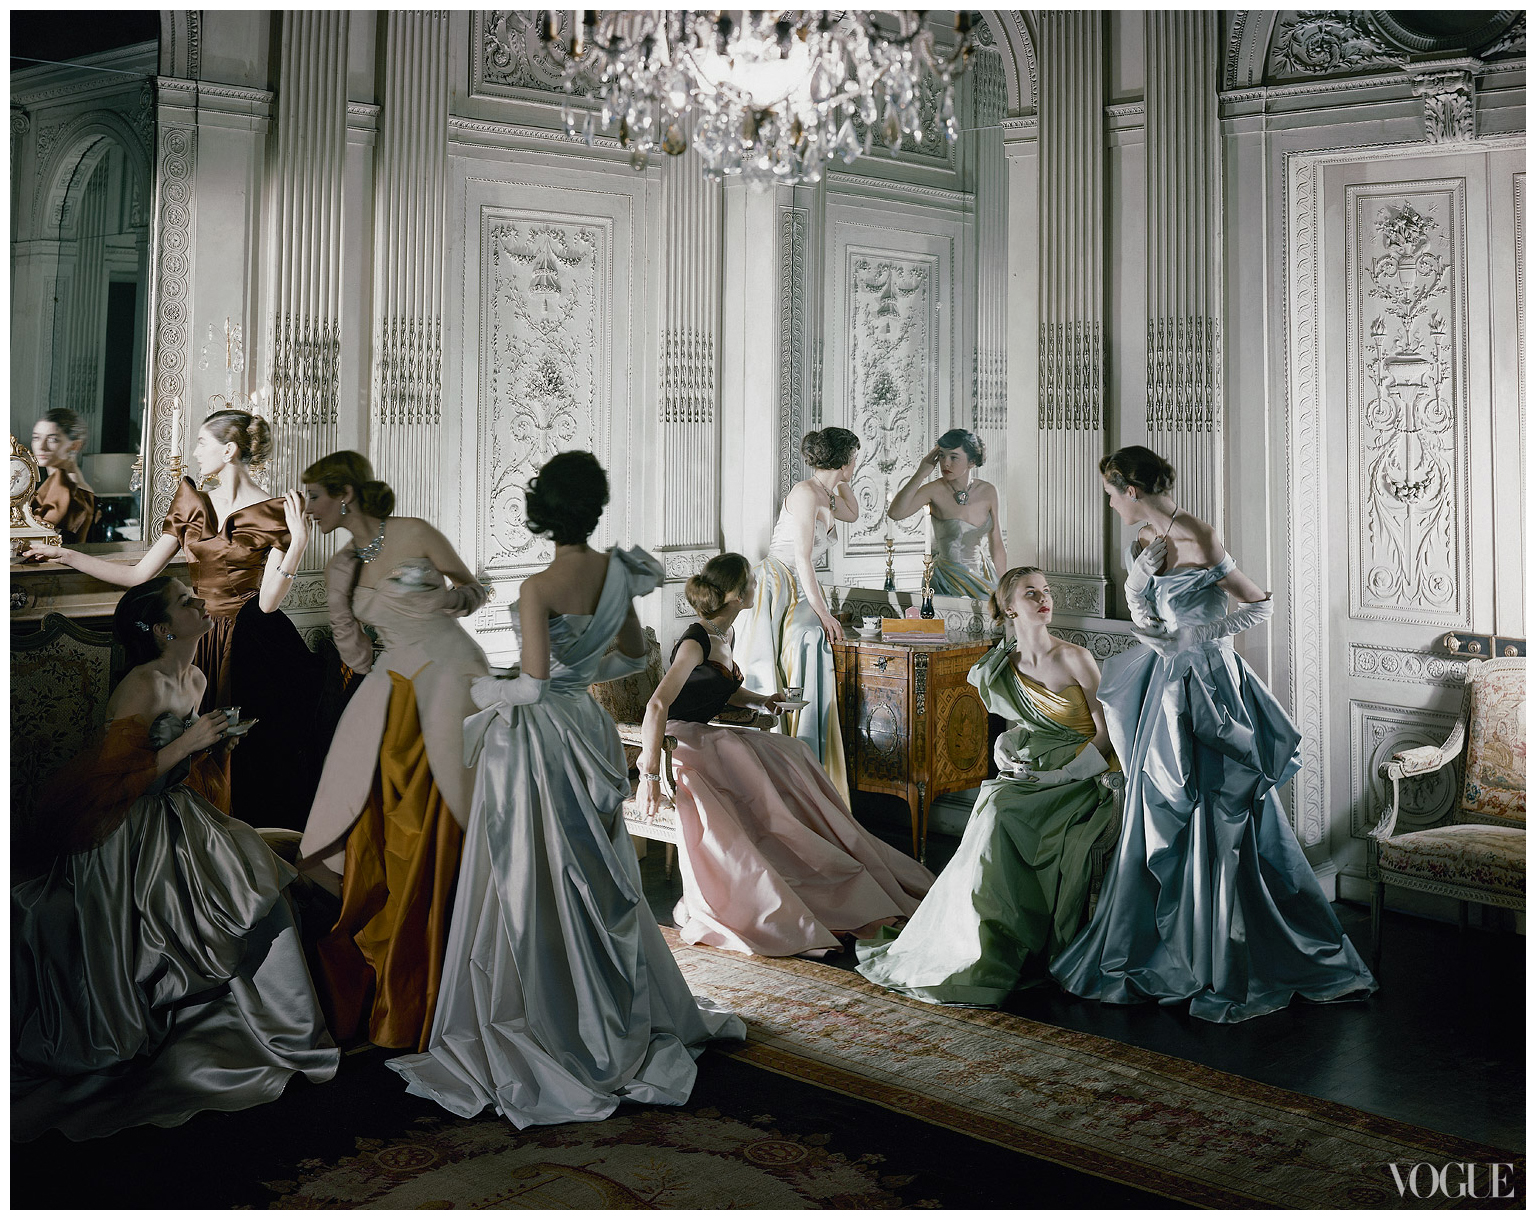 iconic-image-of-charles-james-ball-gowns-photographed-in-the-salon-of-french-co-new-york-photographed-by-cecil-beaton-1948.jpg